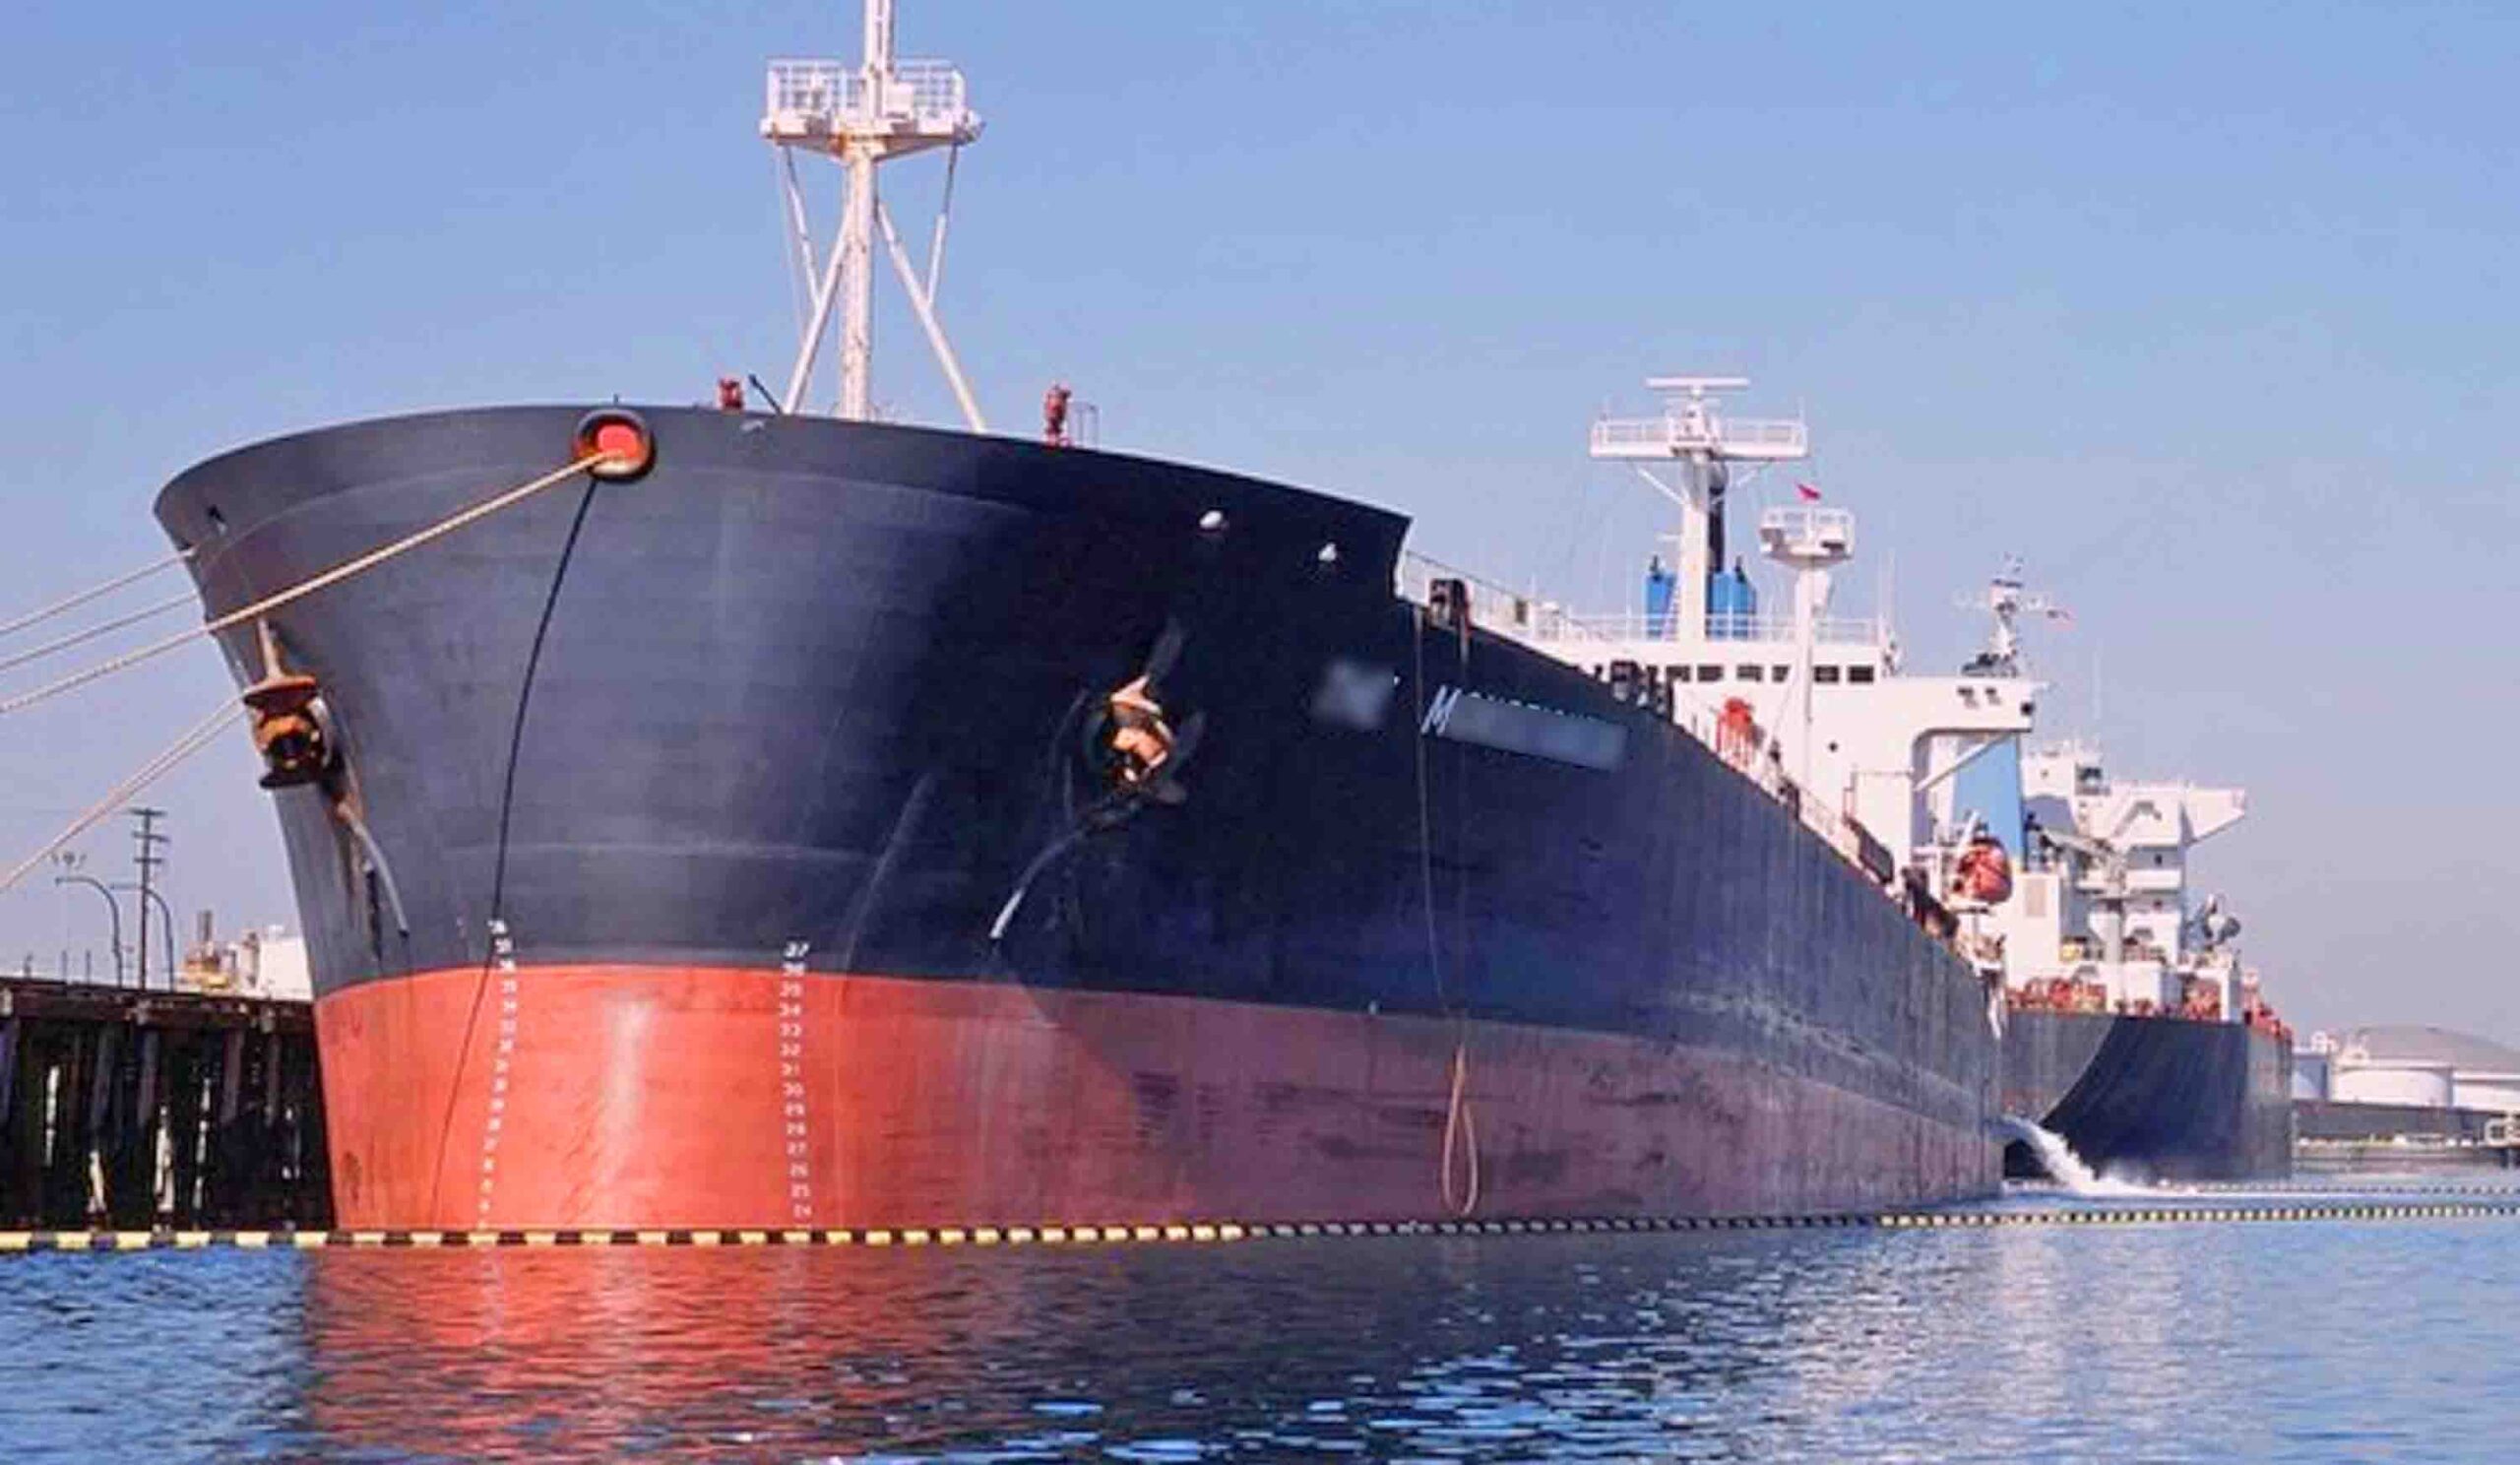 A tanker ship docked in a port with her fire wire lowered on the off-shore side of about 1 meter above the water level.